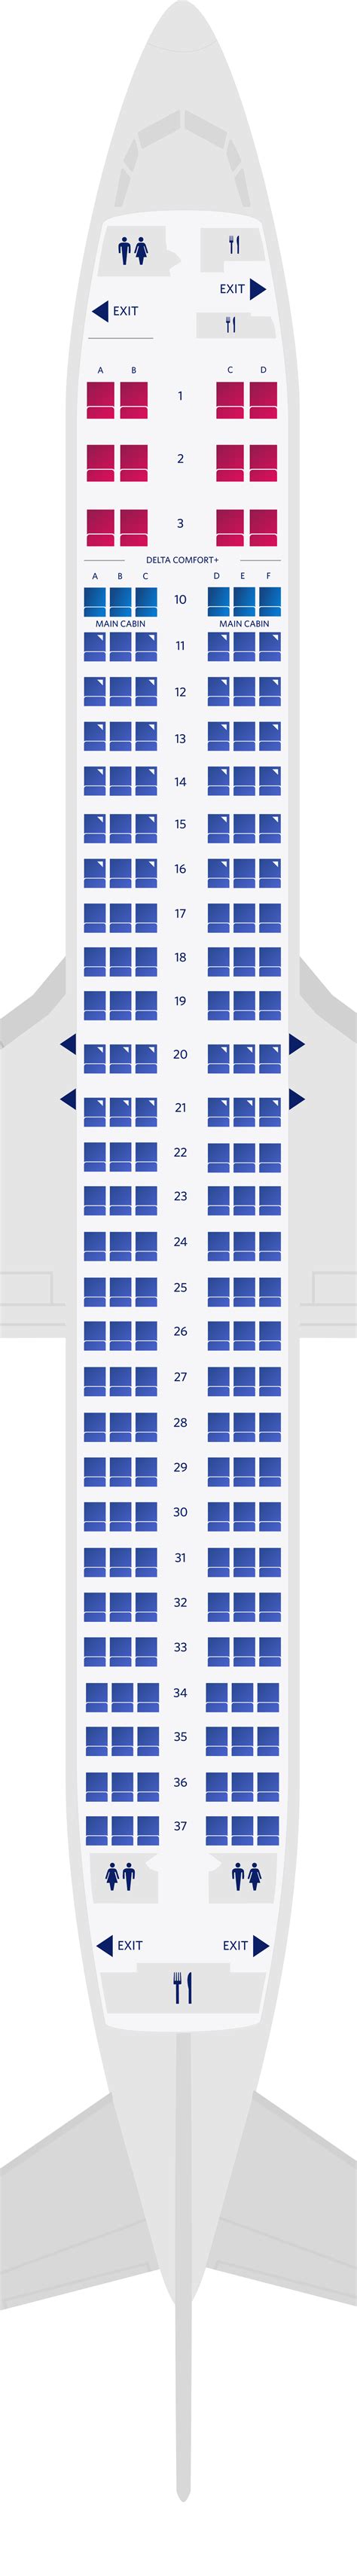 Delta Seat Maps. Overview; Planes & Seat Maps. Airbus A220-100 (CS1) Airbus A319 (319) Airbus A320 (32K) Layout 1; Airbus A320 (32M) Layout 2; Airbus A321 (321) Layout 1;. 